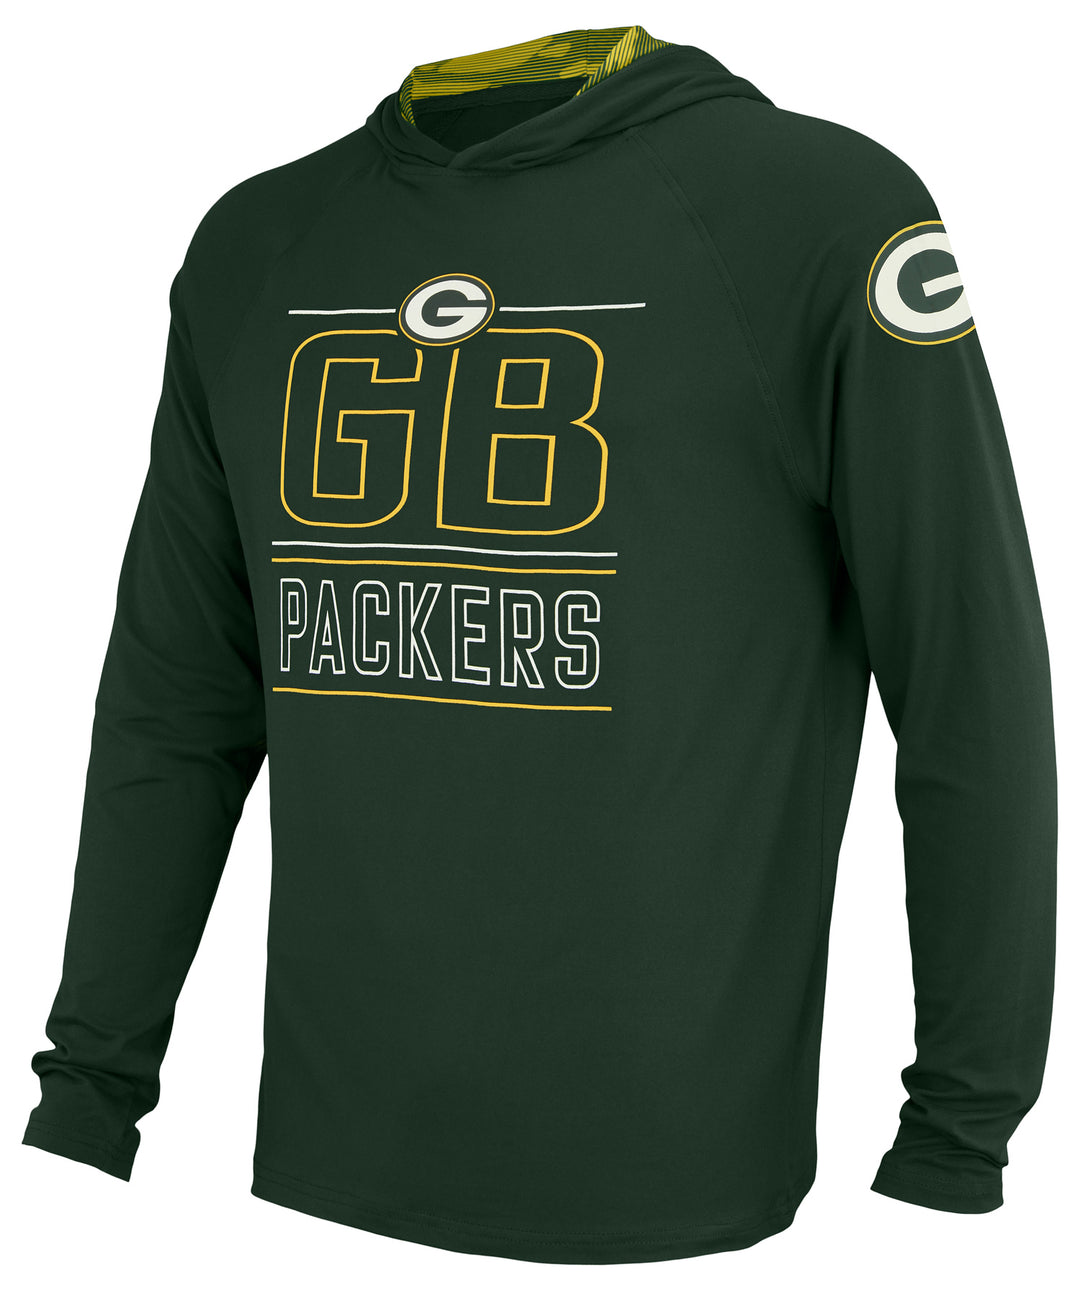 Zubaz NFL Men's Green Bay Packers Team Color Active Hoodie With Camo Accents